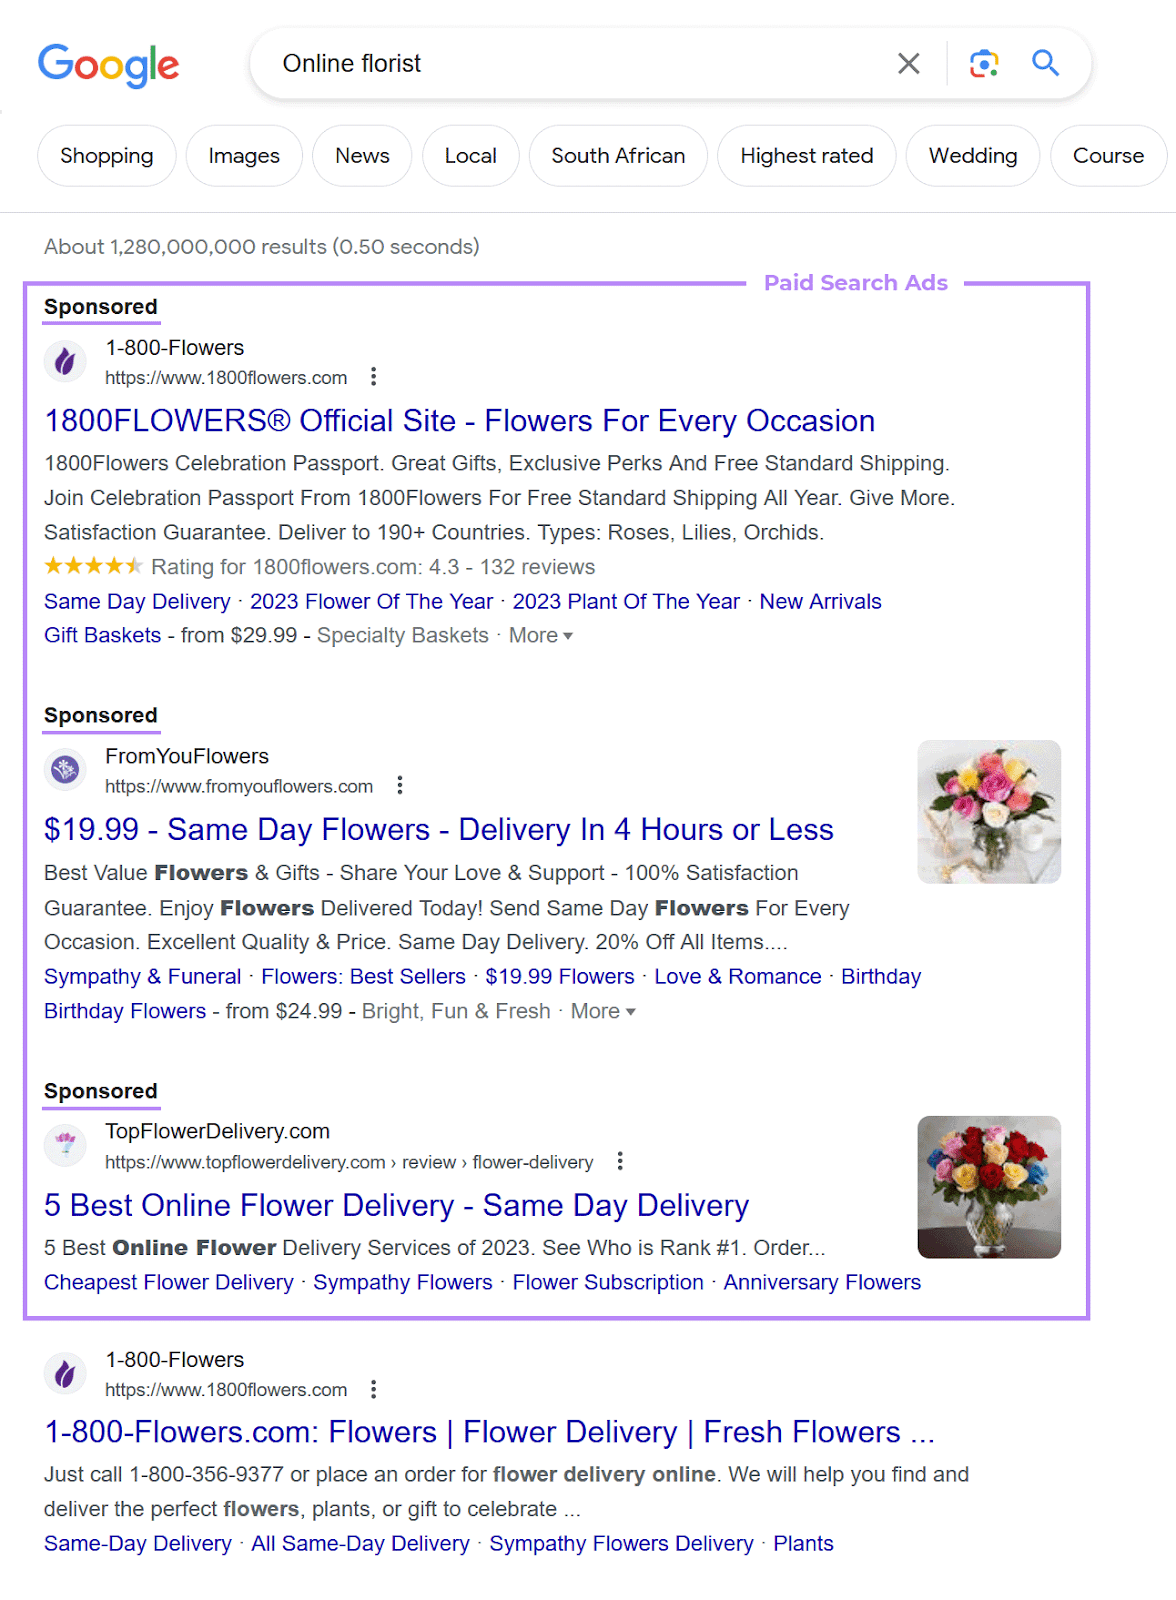 Google SERP including paid ads for “online florist” search